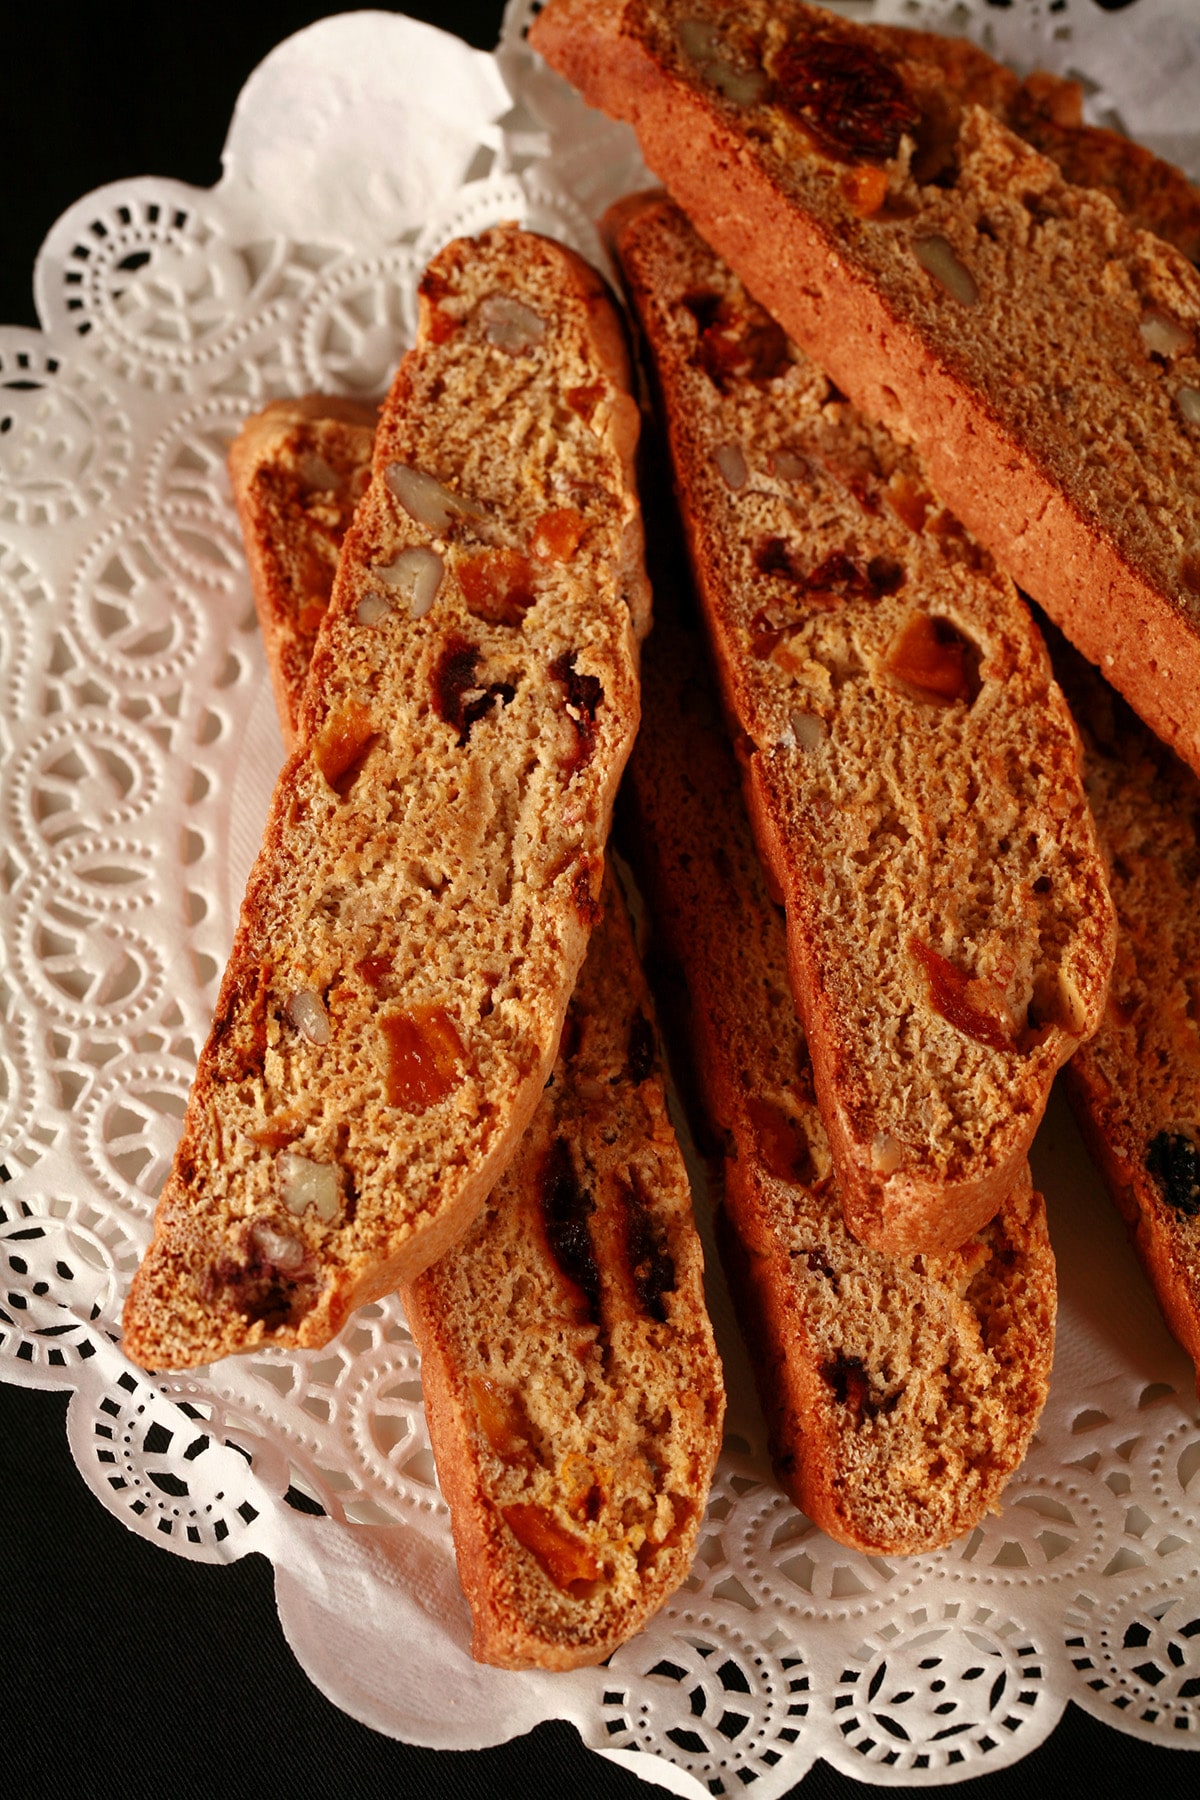 Several pieces of fruitcake biscotti, piled on a doily covered plate.